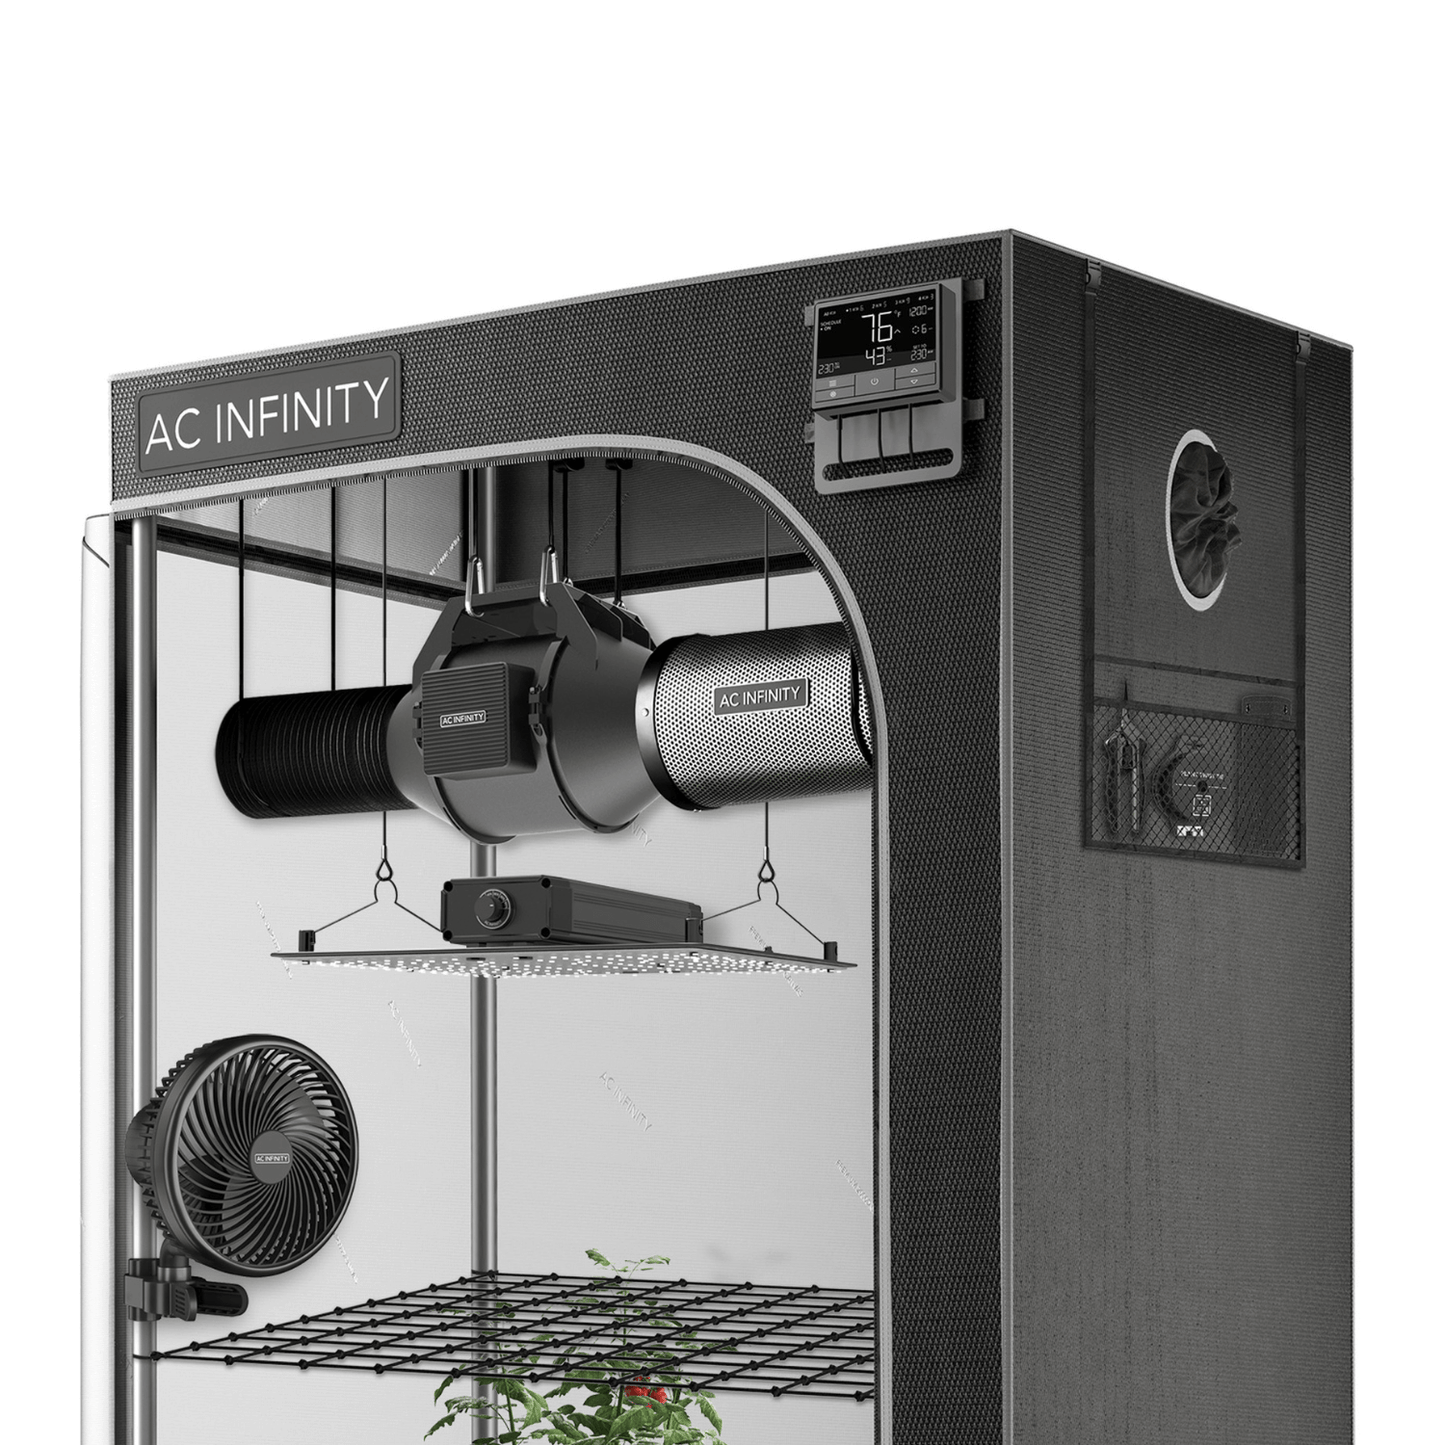 AC Infinity Advance Grow Tent System 2x2 Compact Kit, Integrated Smart Controls, and Full Spectrum LED Grow Light AC-PKA22 Kits 819137022829